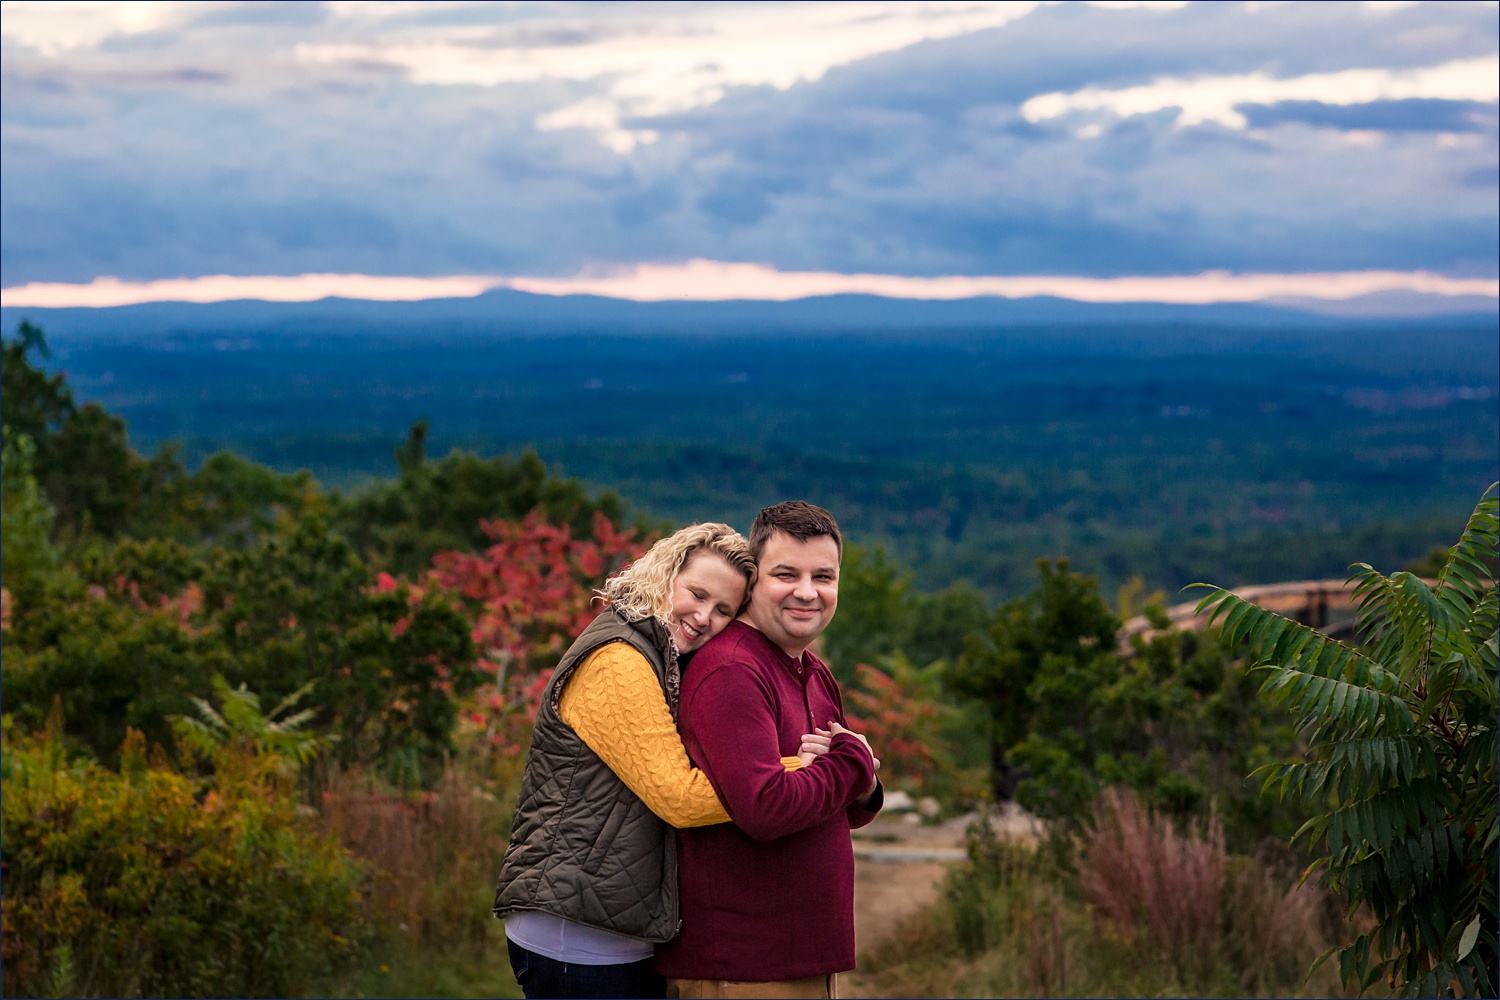 She squeezes him tight in a bear hug at their fall Maine engagement session